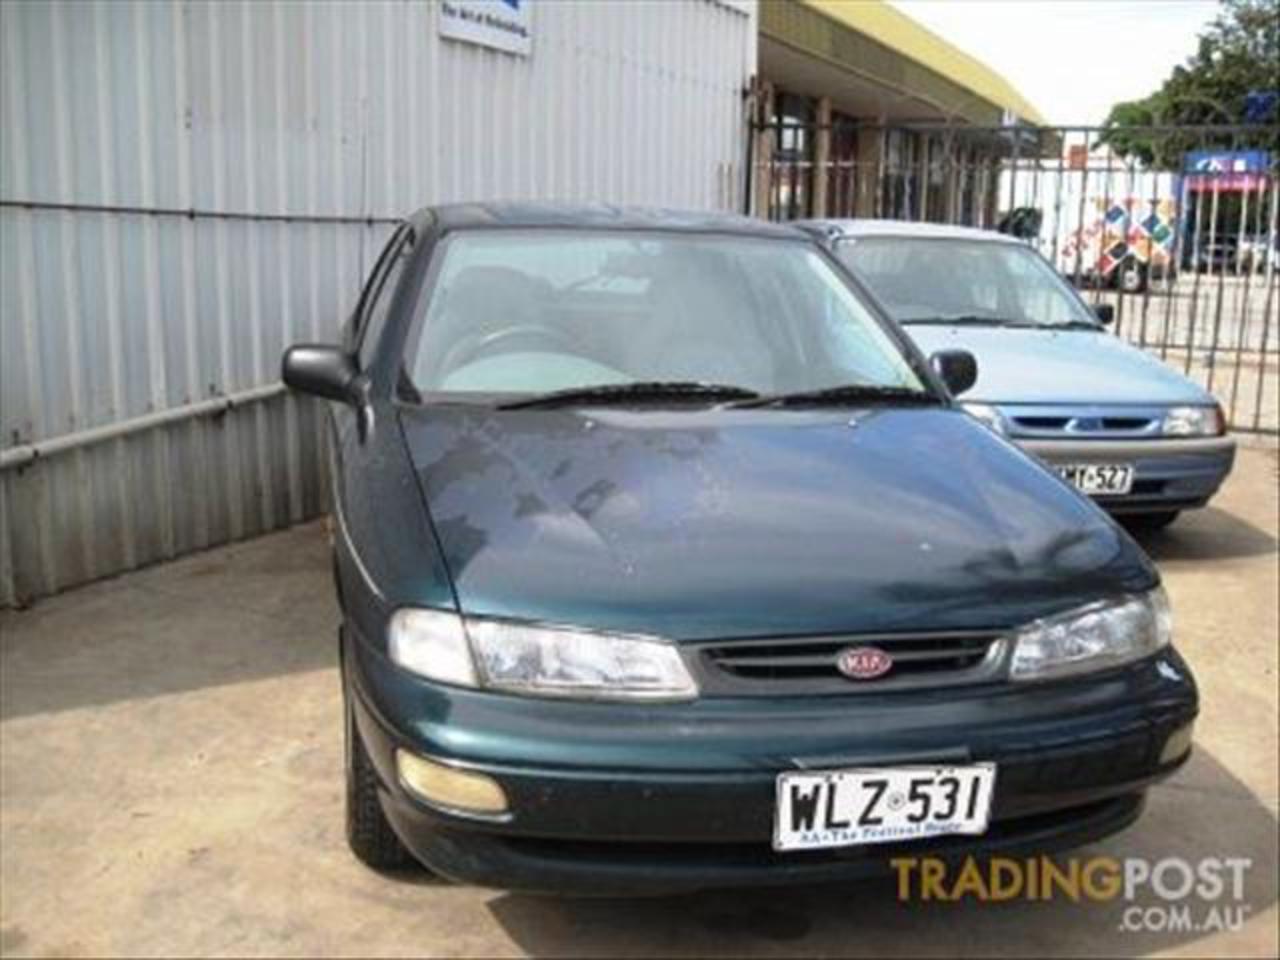 Used 1997 KIA MENTOR GLX 5D HATCHBACK for sale in Adelaide | Best ...